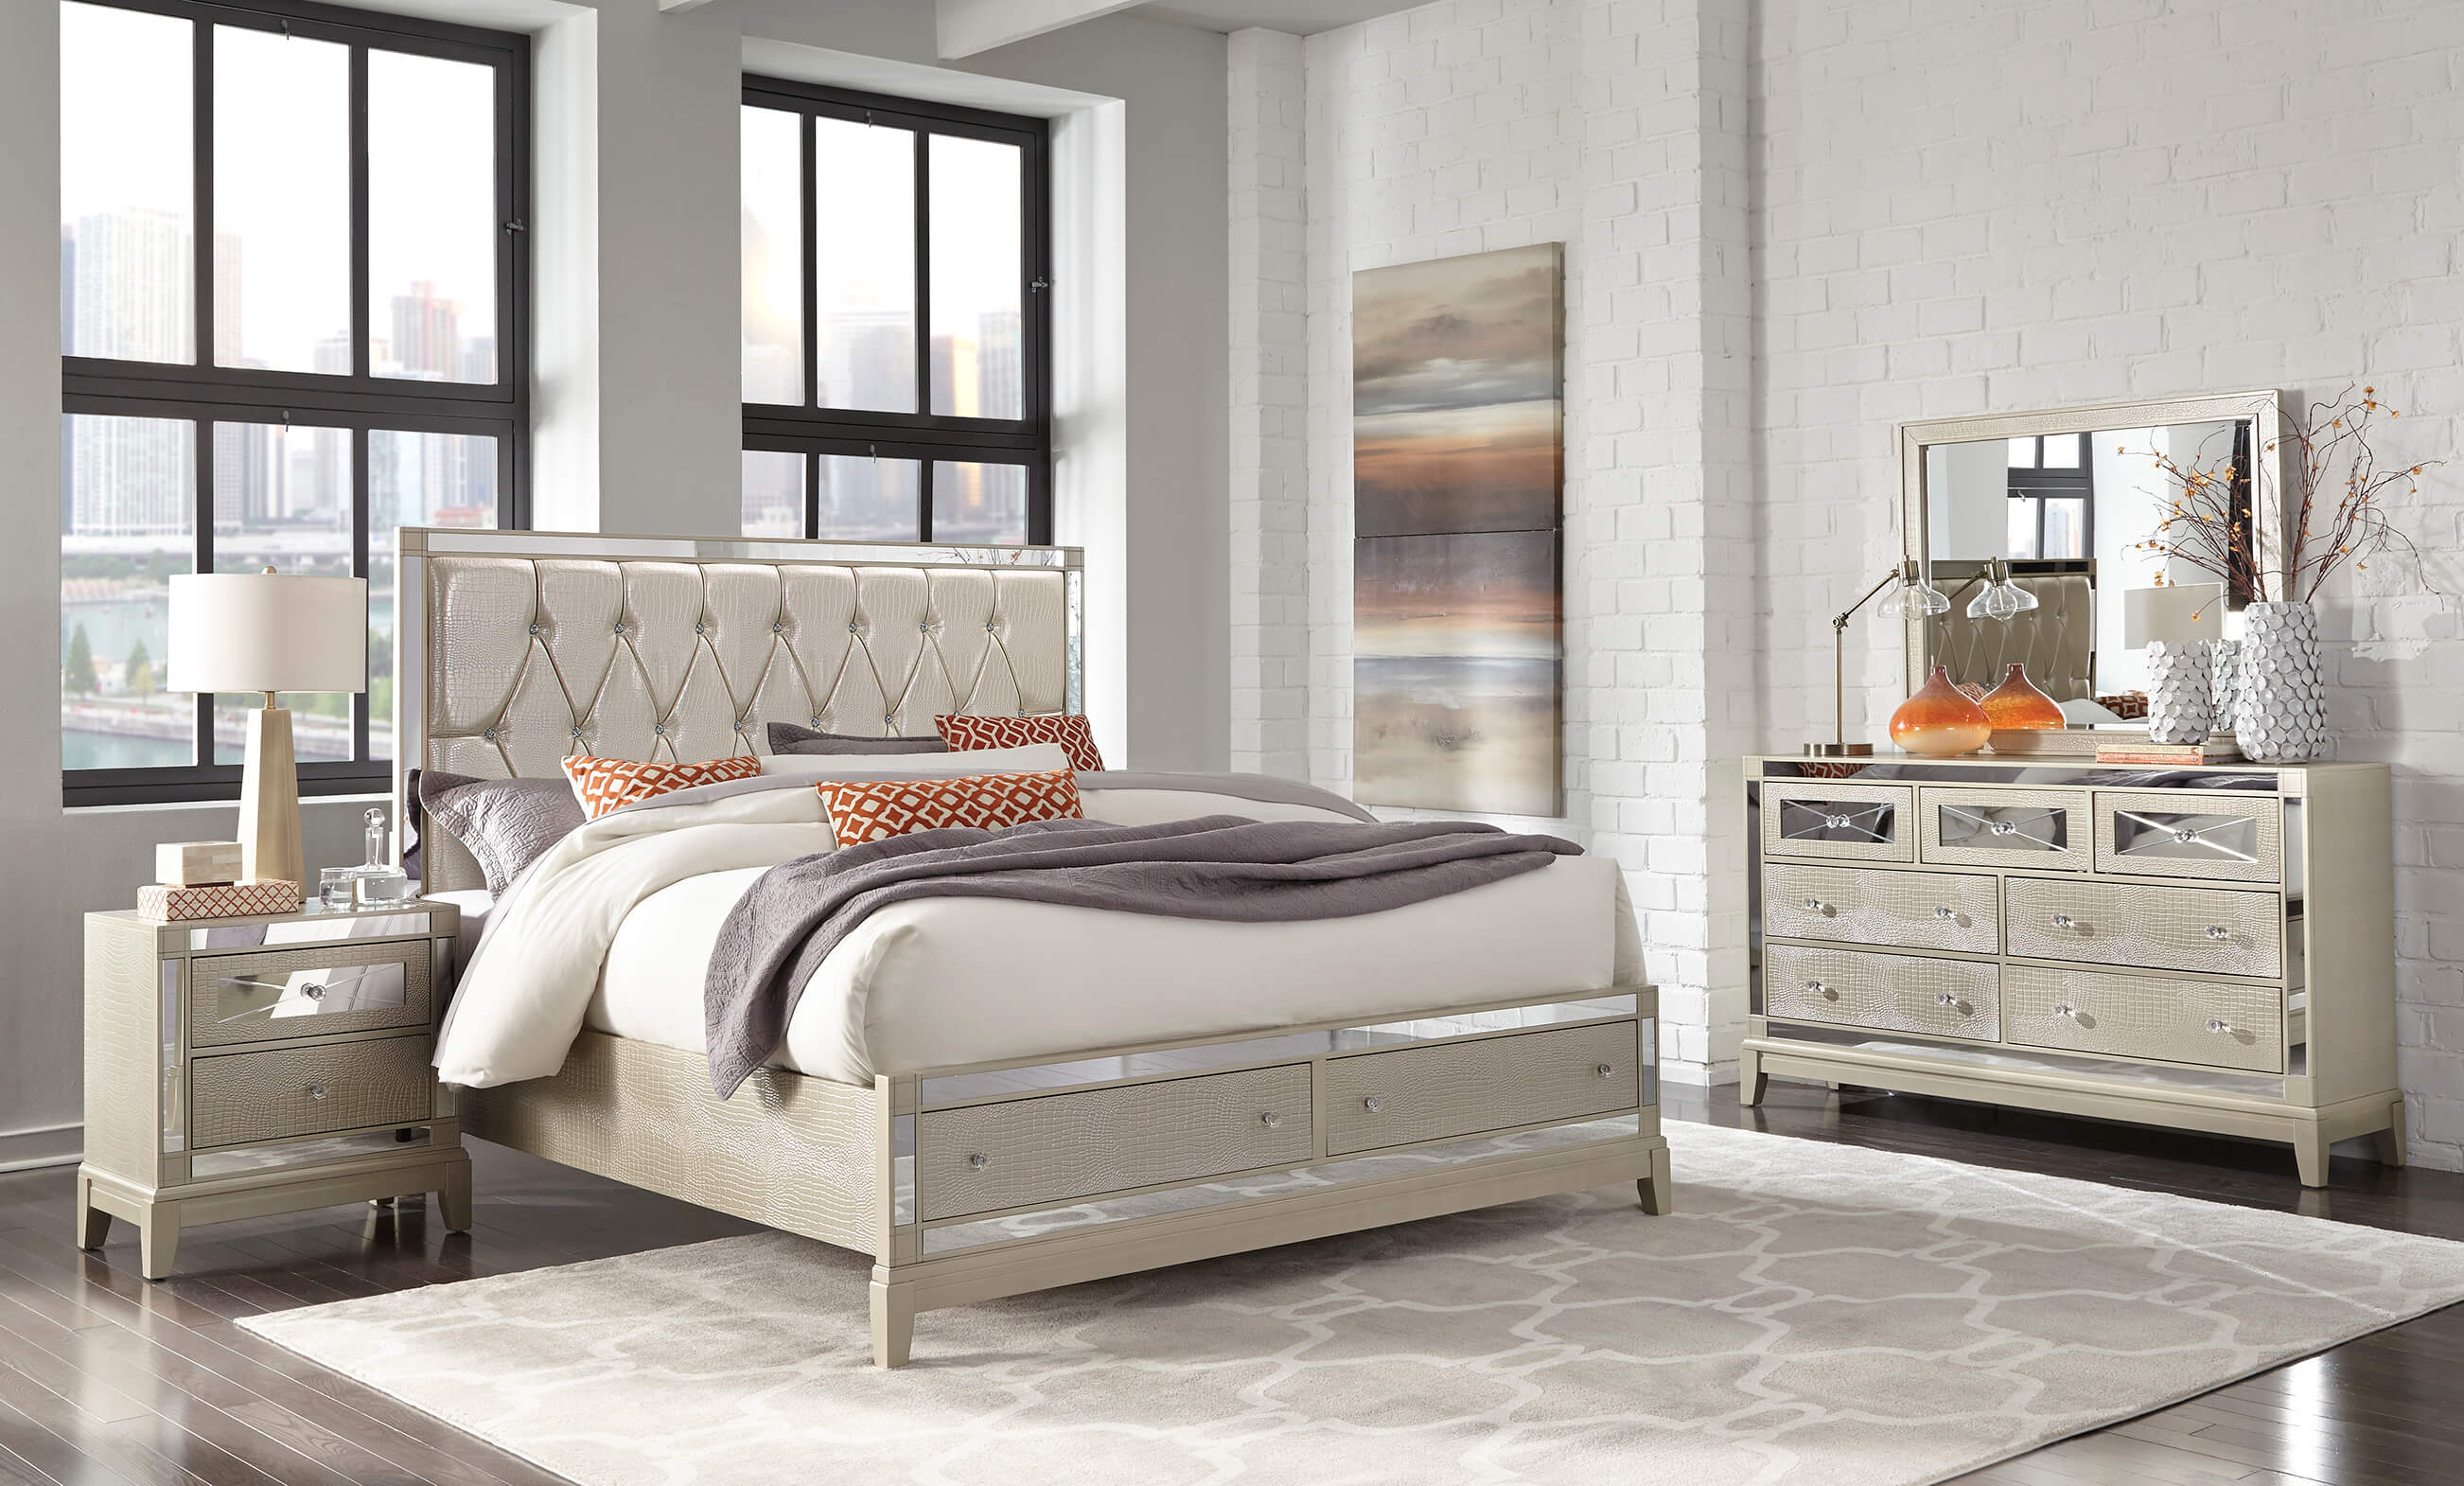 Mirror Champagne Bedroom Set throughout dimensions 2604 X 1570